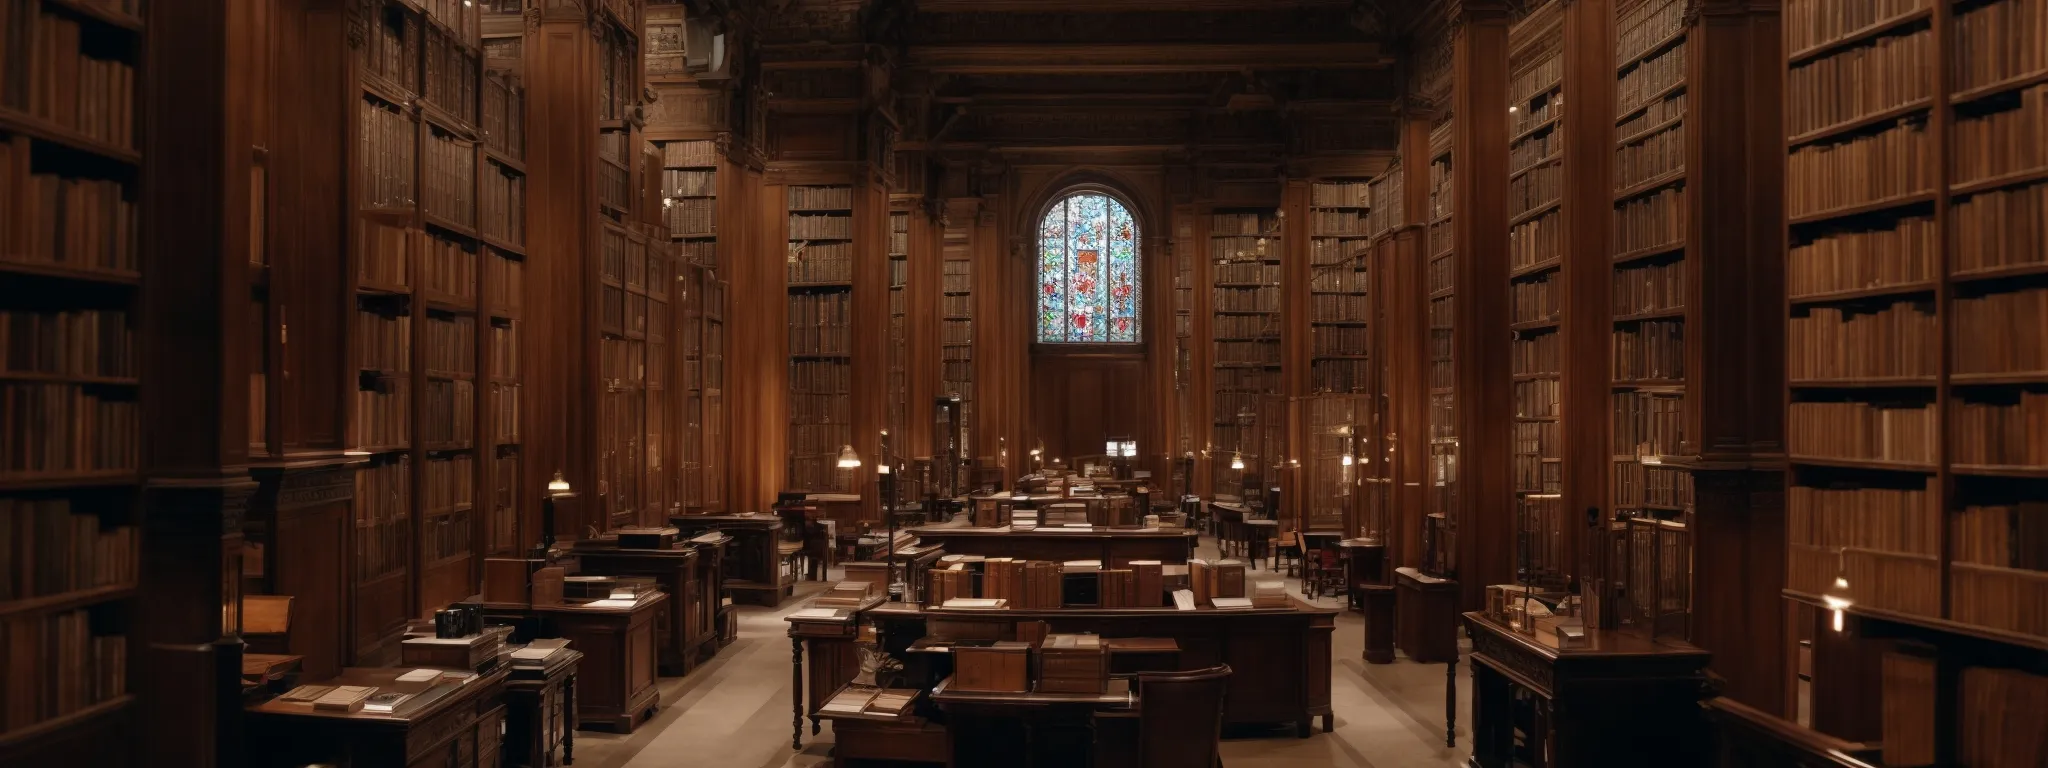 a vast library with an elaborate card catalog system and interconnected bookshelves.